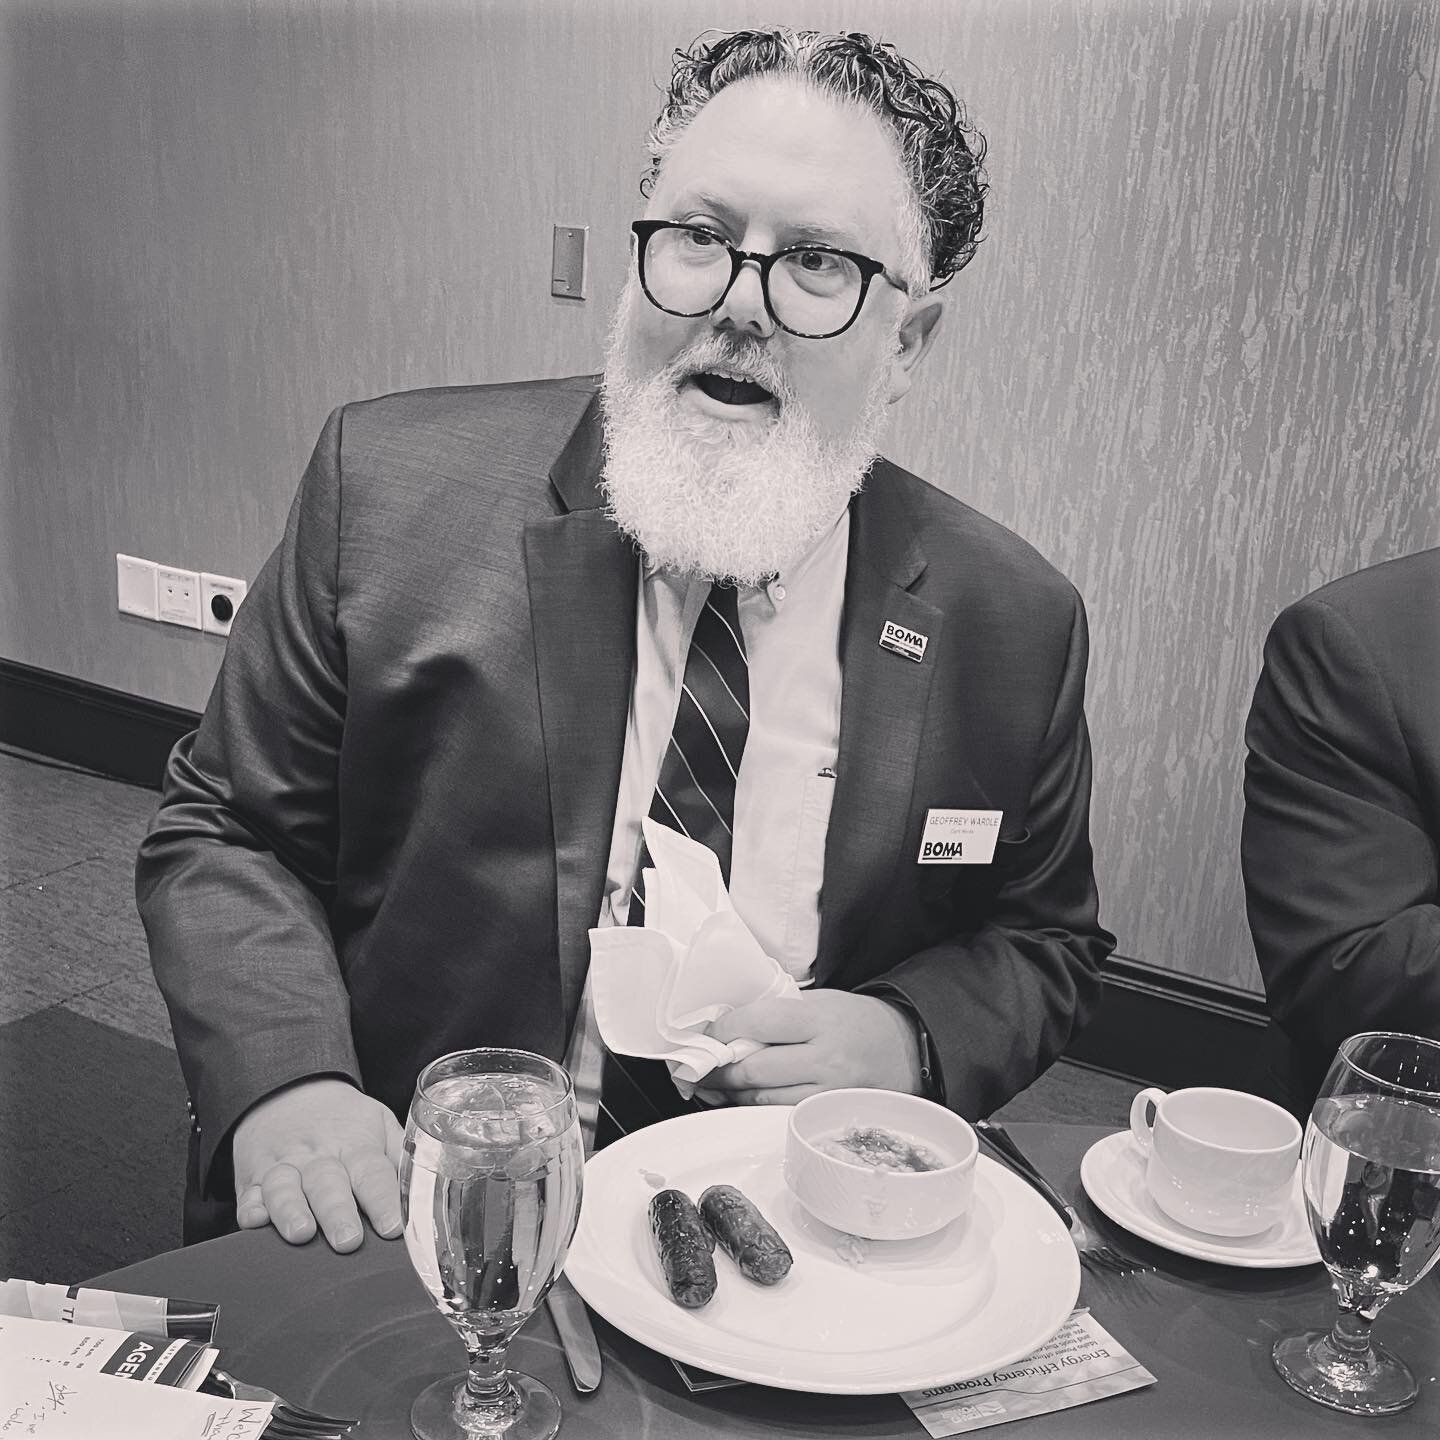 @geoffreywardle enjoying a lumberjack breakfast right before delivering an amazing address at the @bomaidaho Commercial Real Estate Symposium. 

#boise #boma #bomaidaho #bomasympo23 #commercialrealestate